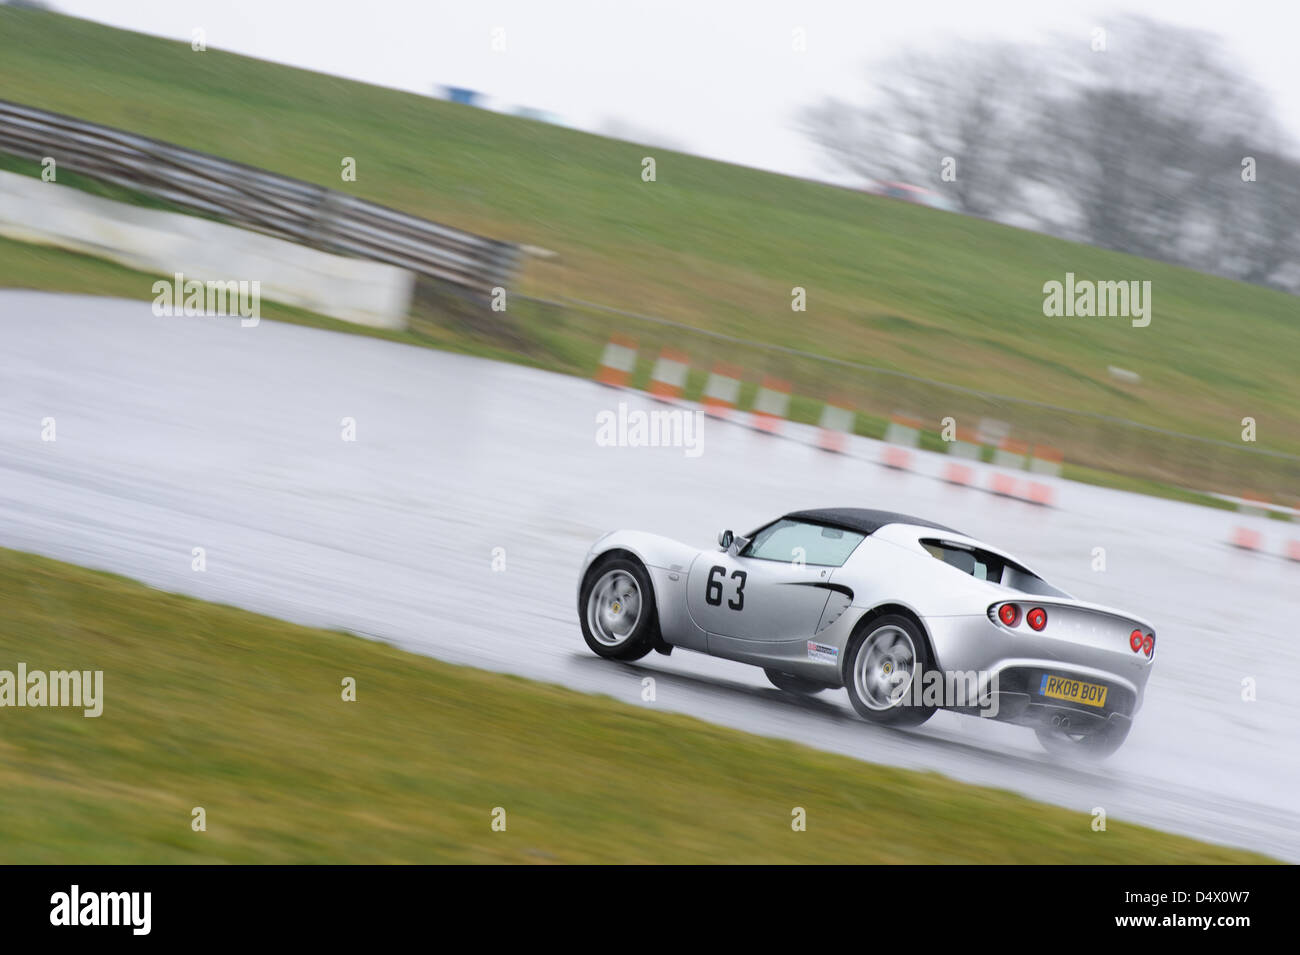 A car taking part in a Sprint motorsport event at Mallory Park Circuit. Stock Photo